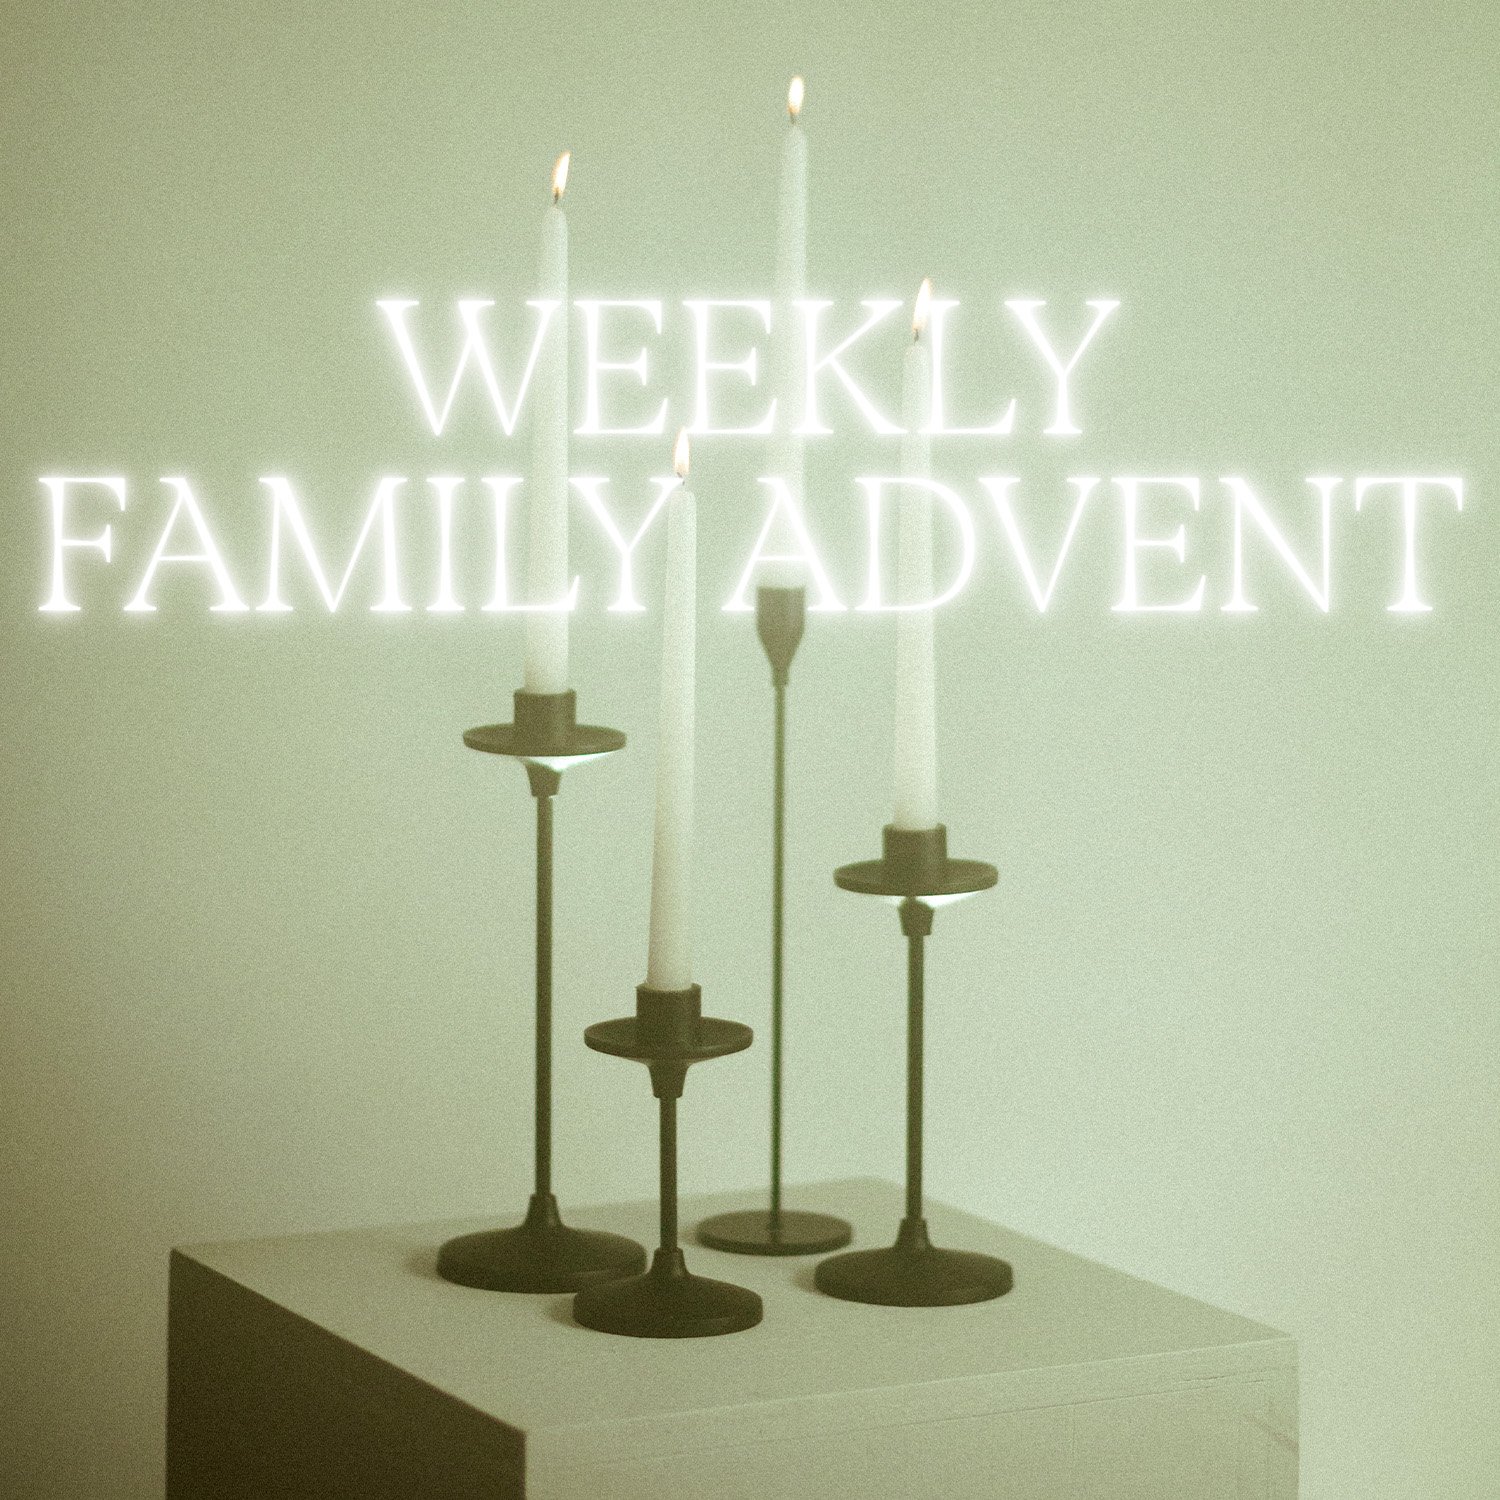 Weekly Family Advent_Square 1500x1500.jpg